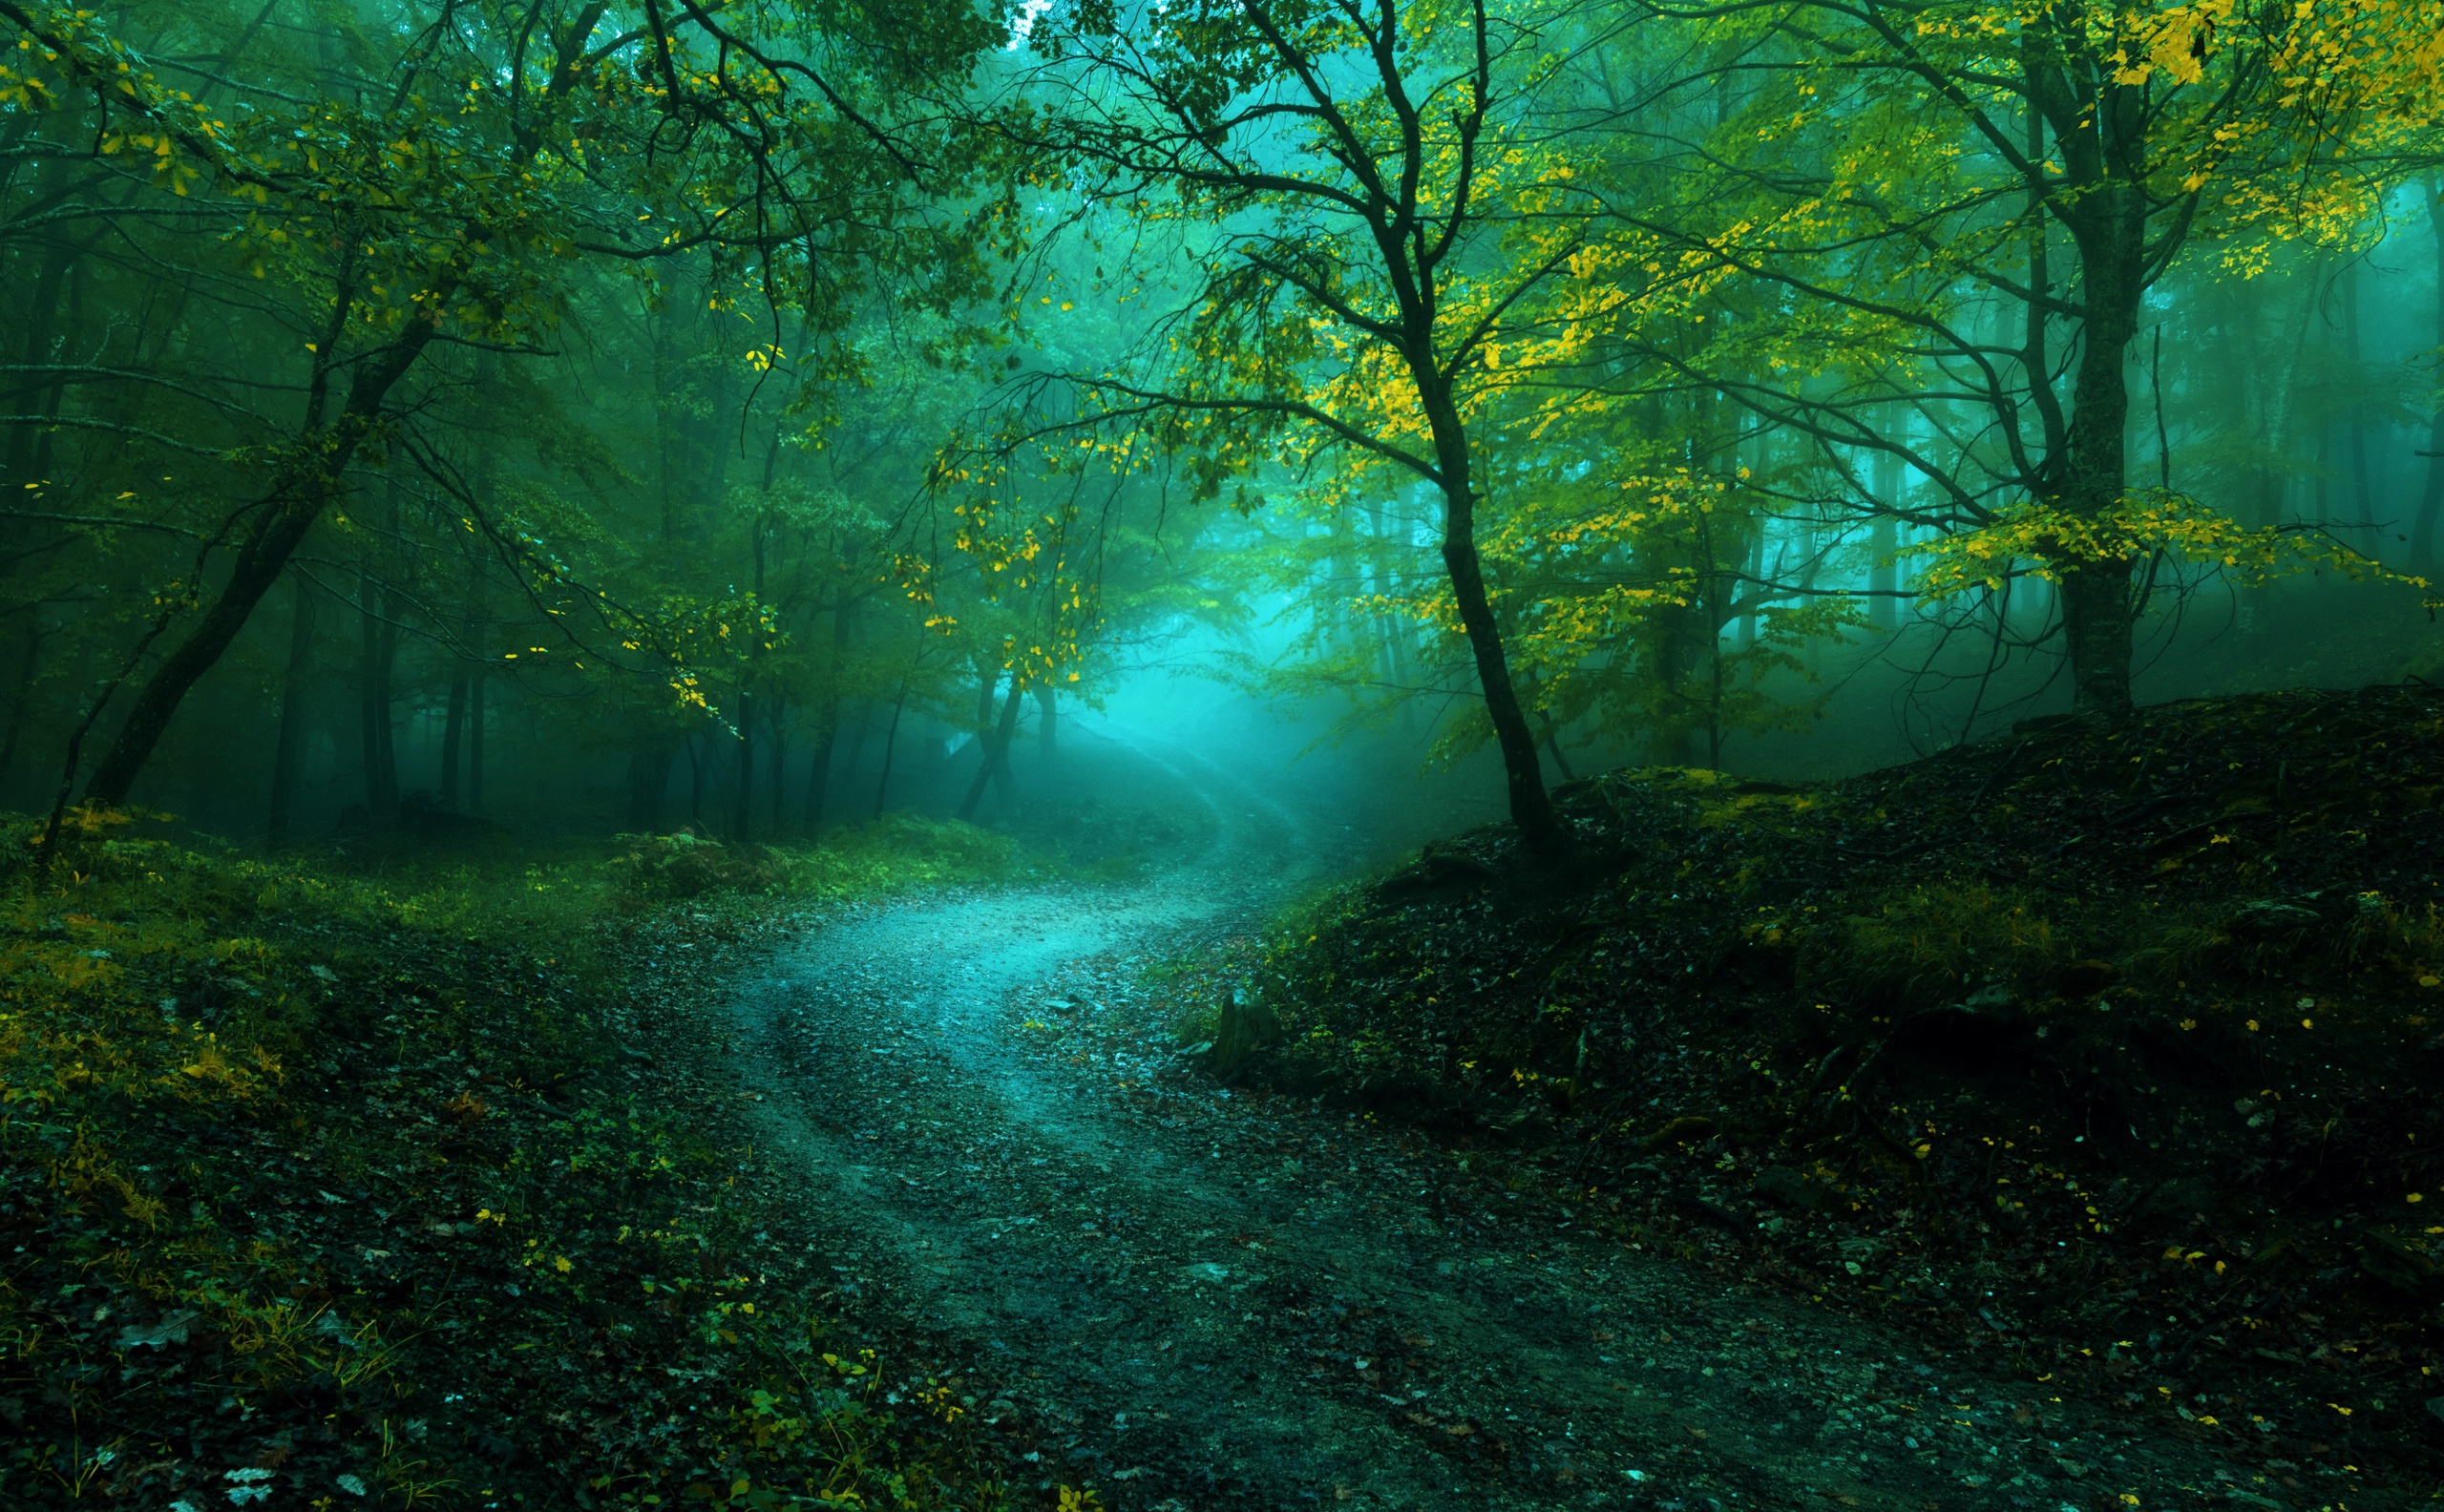 Earth Path HD Wallpaper | Background Image